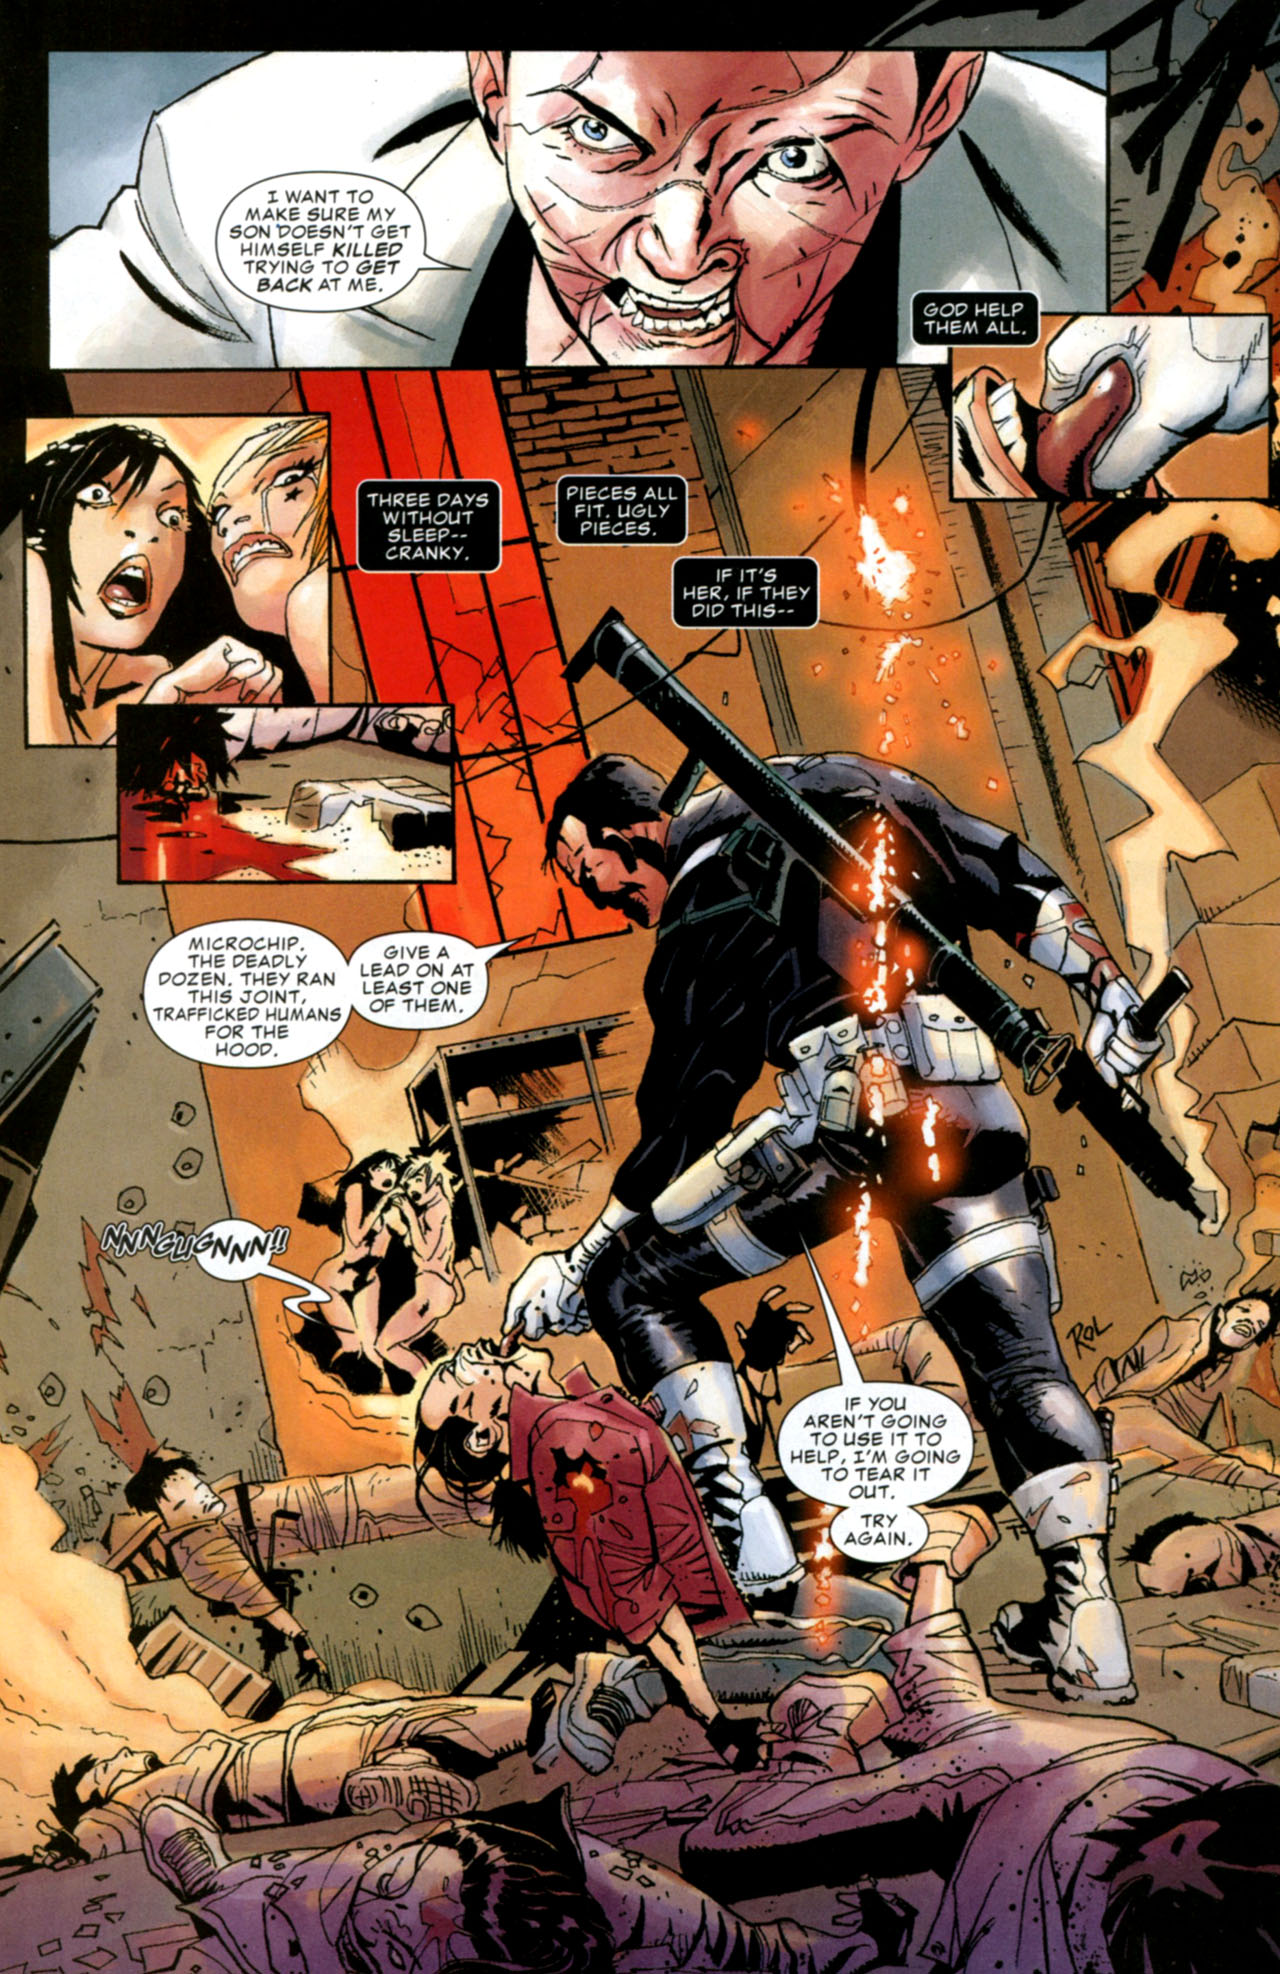 Punisher: In The Blood #2 - In The Blood Part Two 